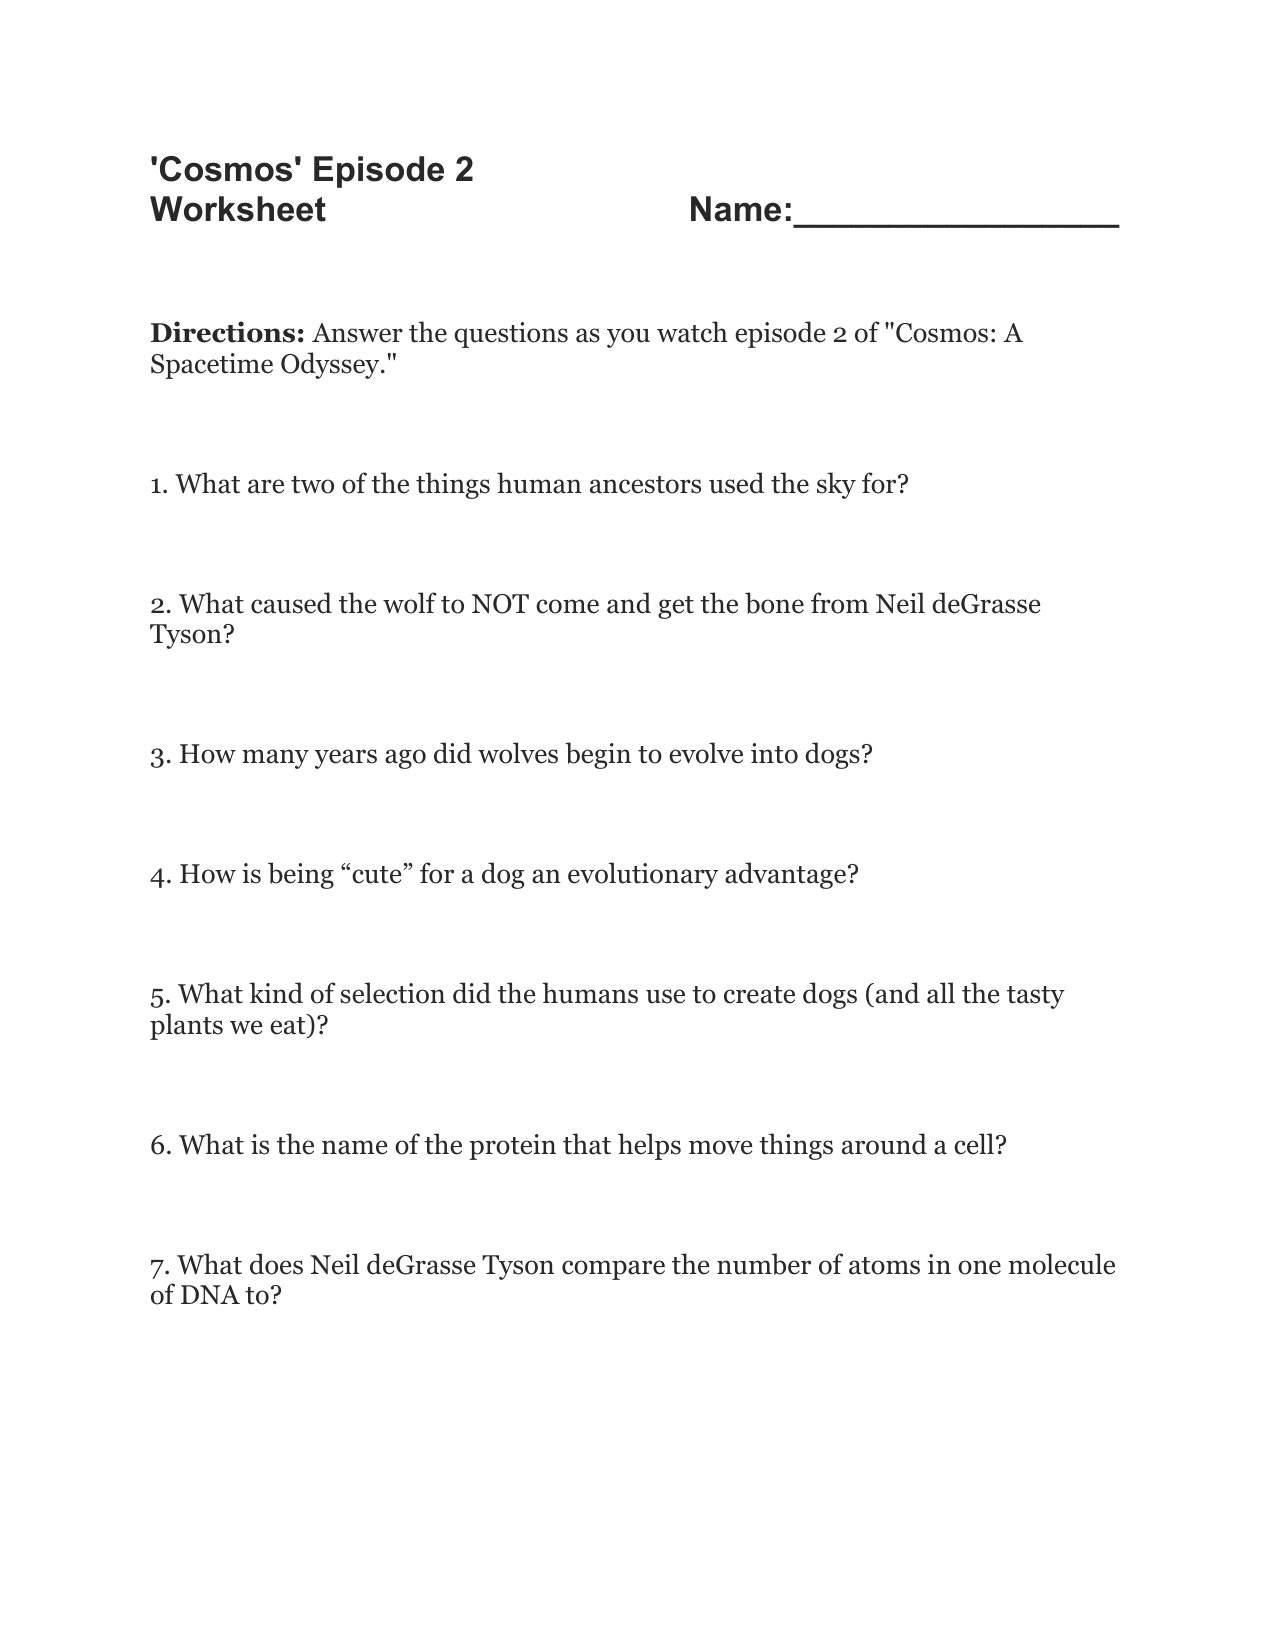 Cosmosepisode11 questions In Cosmos Episode 1 Worksheet Answers